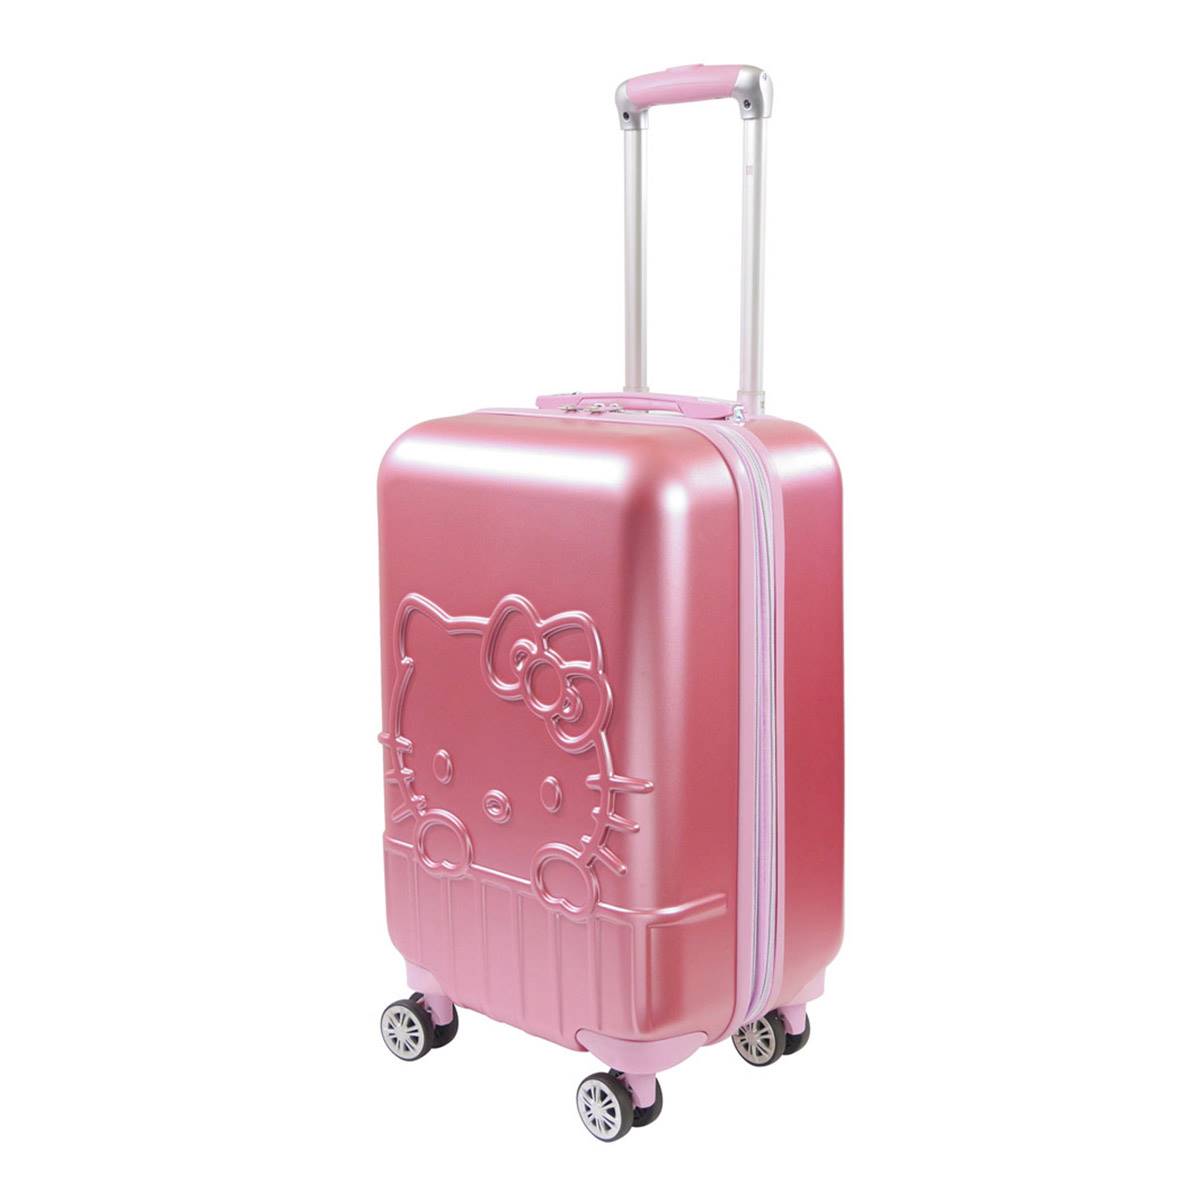 FUL Hello Kitty(R) 21in. Hardside Rolling Carry-On Spinner Luggage